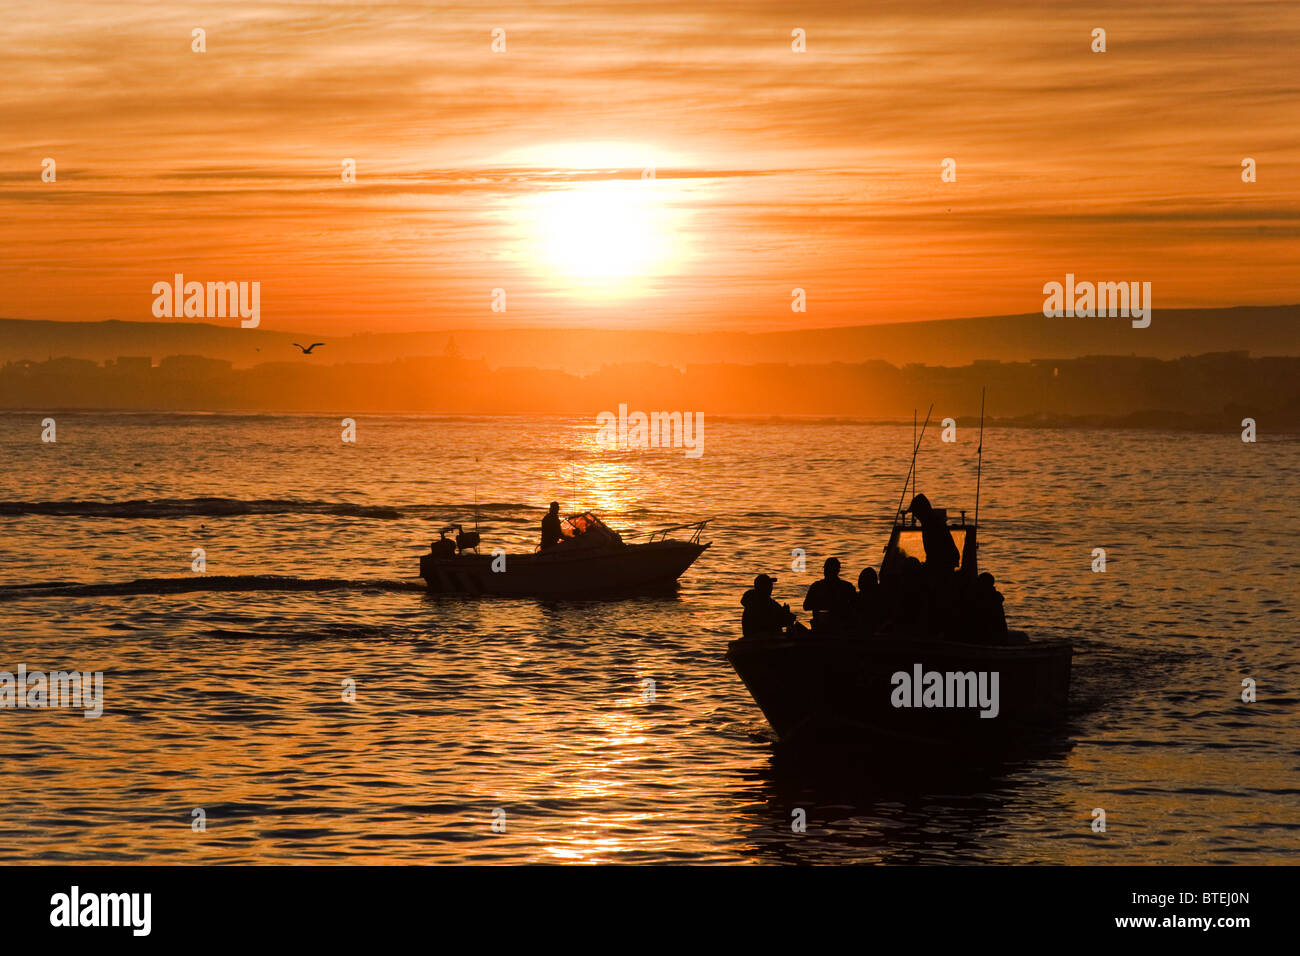 Fishing boat silhouetted in early morning sunrise and as it heads out to sea Stock Photo